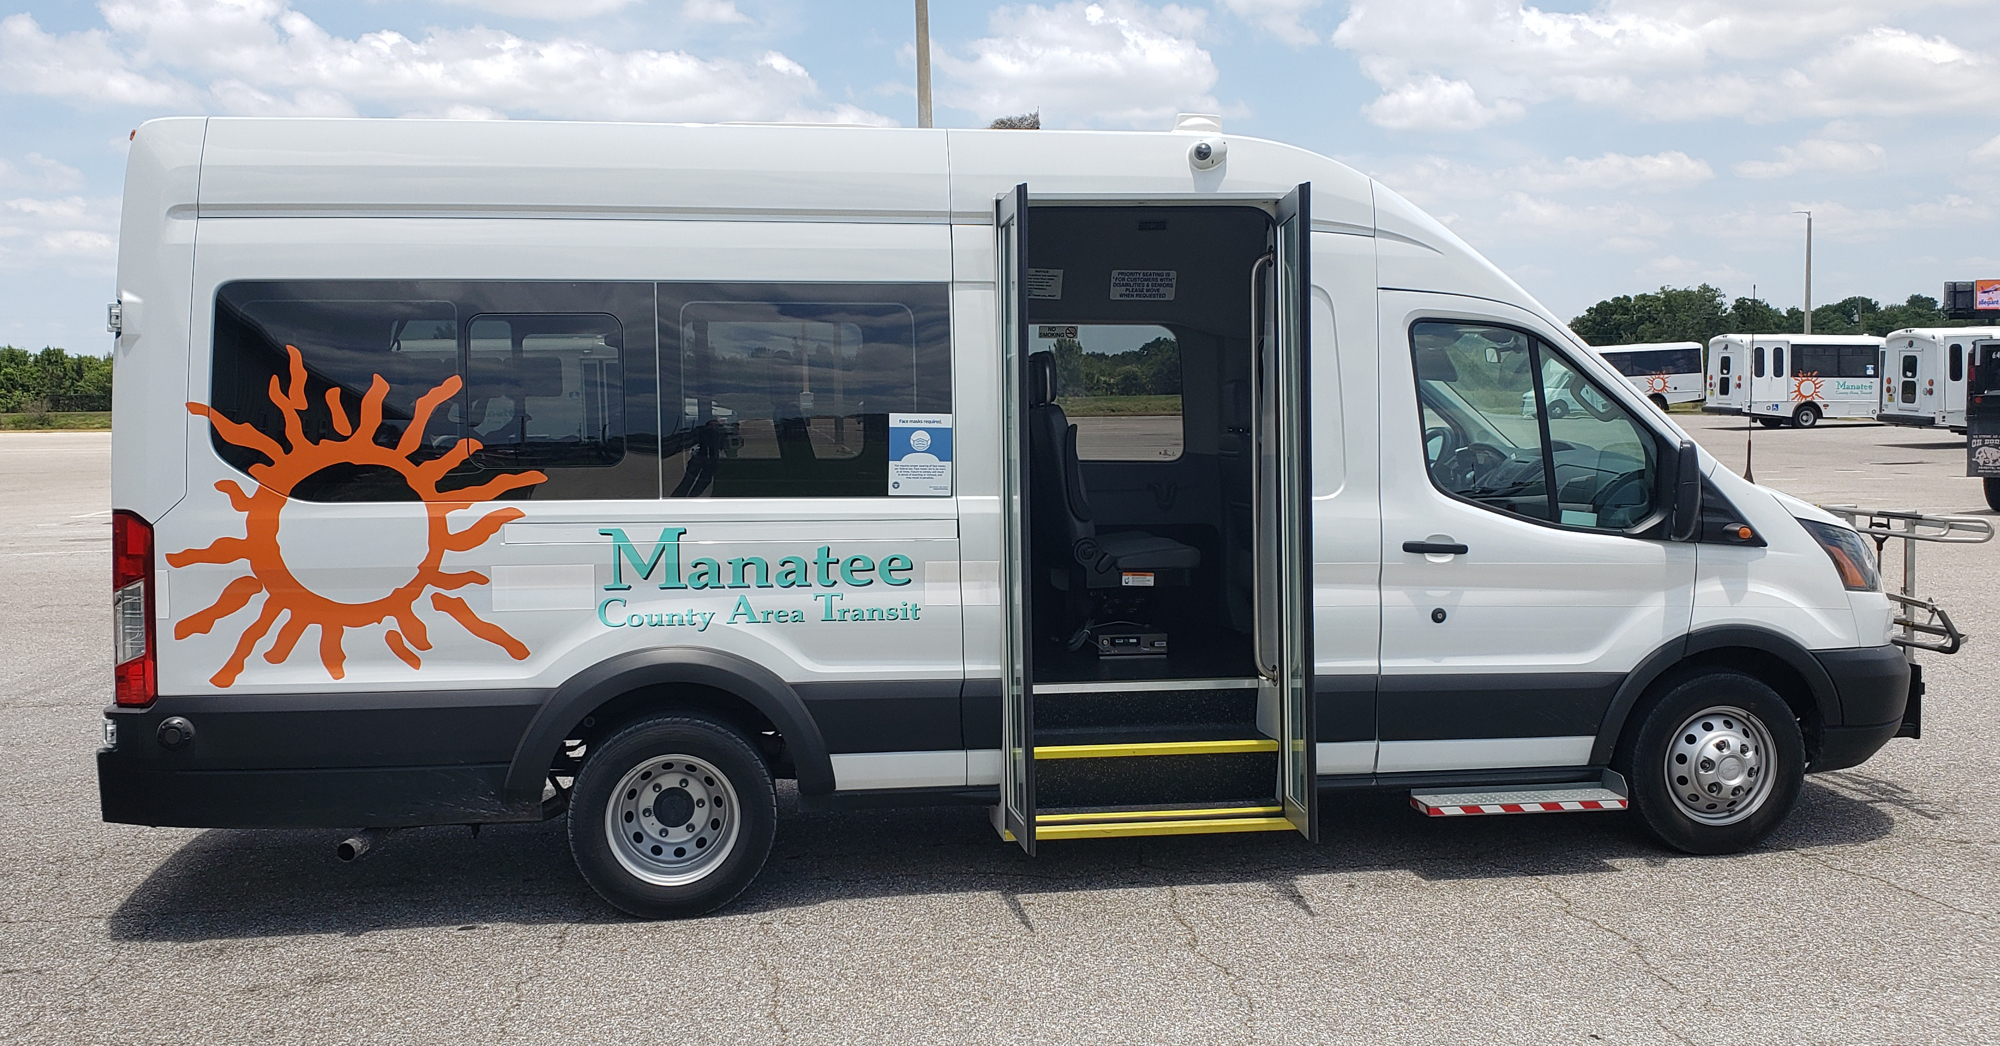 Lakewood Ranch could see MCAT on-demand shuttle buses like this one starting in October 2023. The on-demand services allow riders to schedule trips within a defined service area.